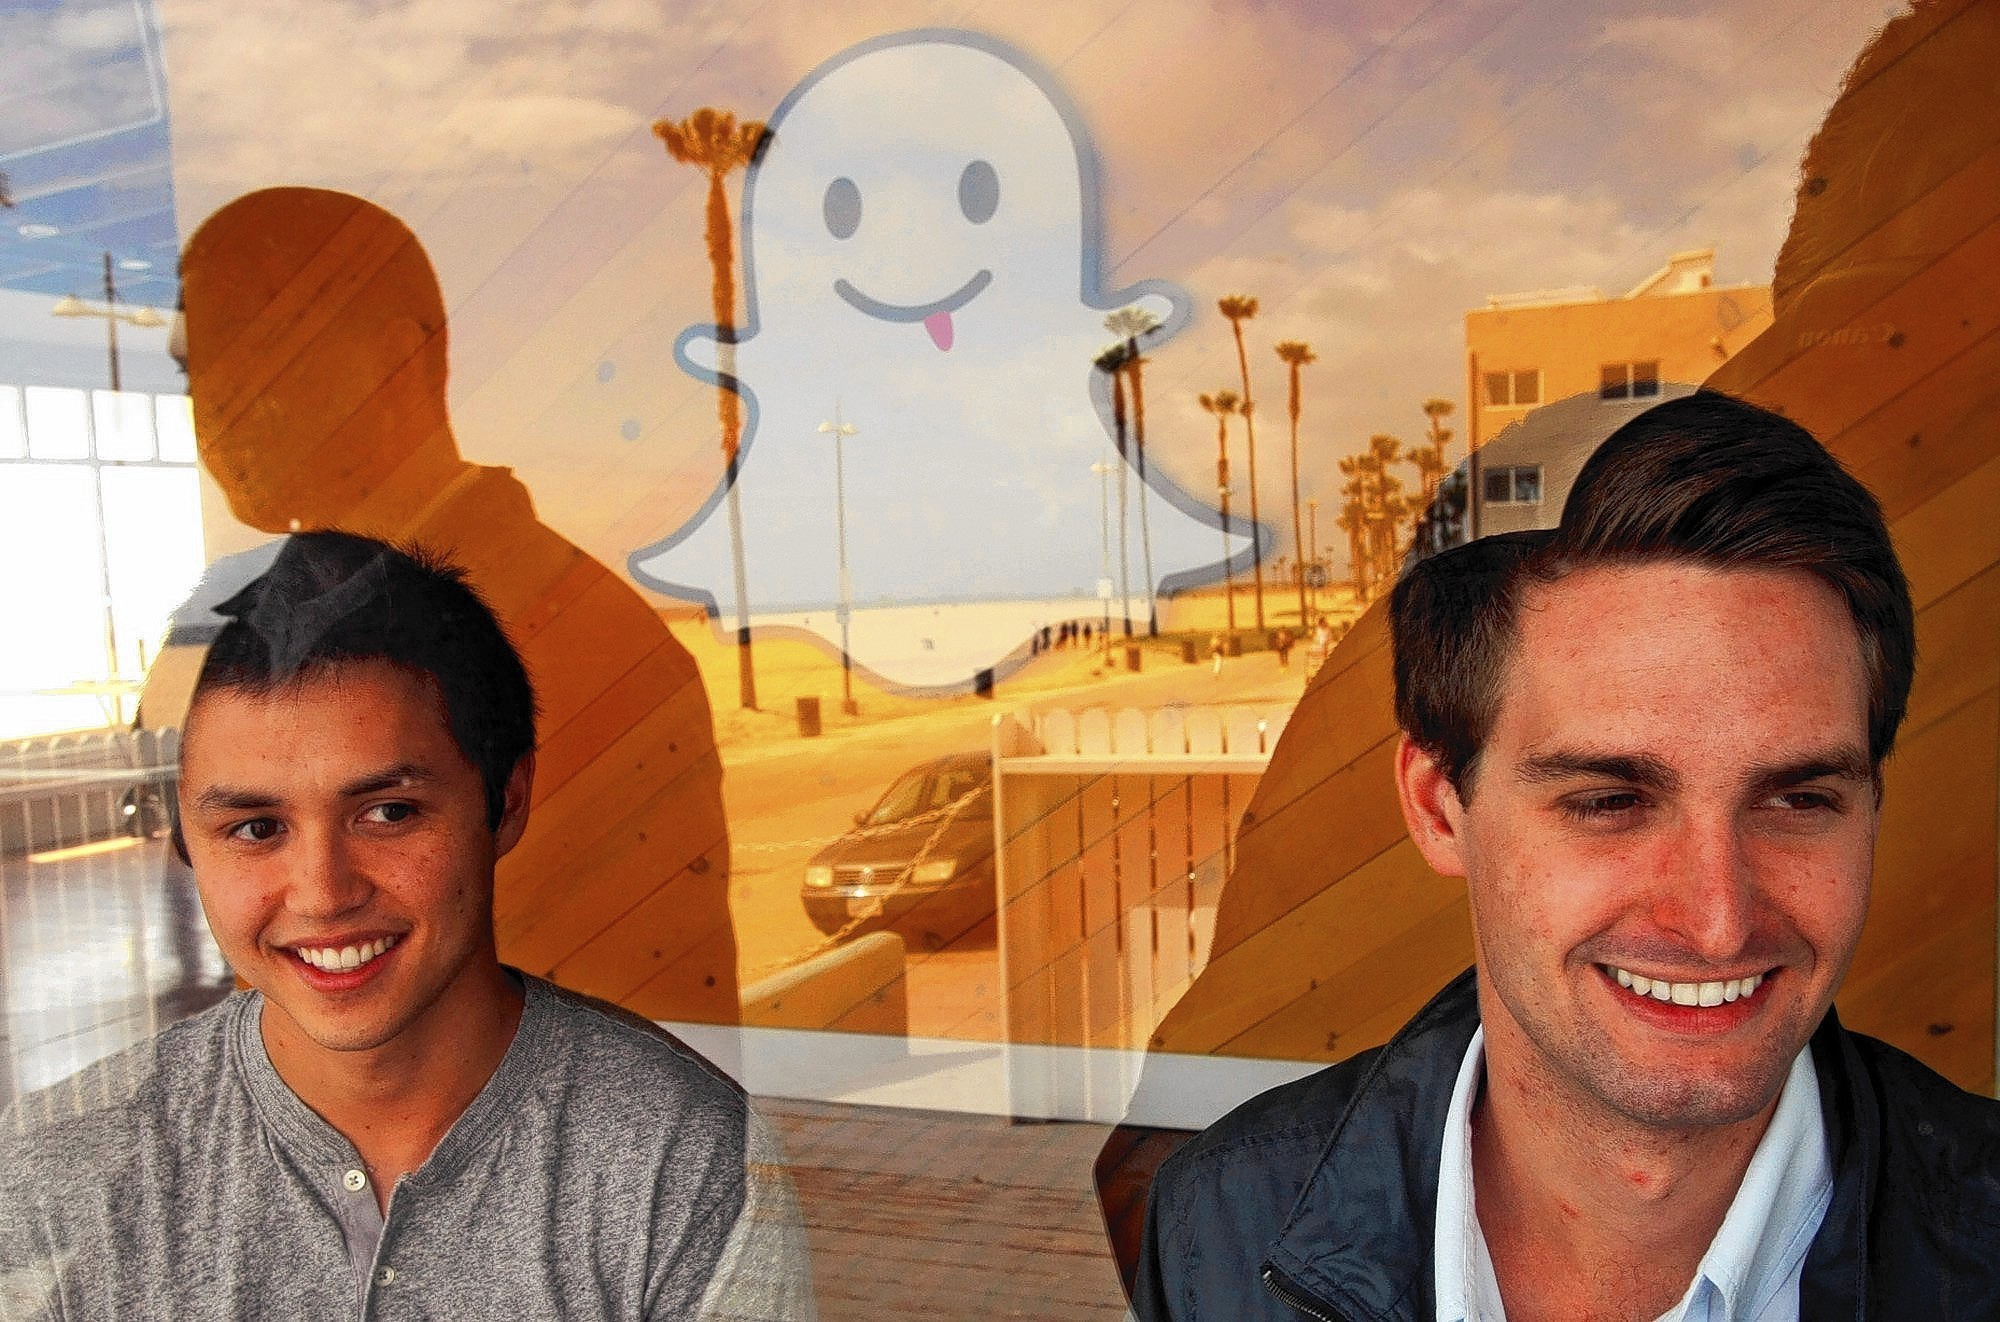 Snapchat And Founders Friend Settle Lawsuit Over Ownership La Times 